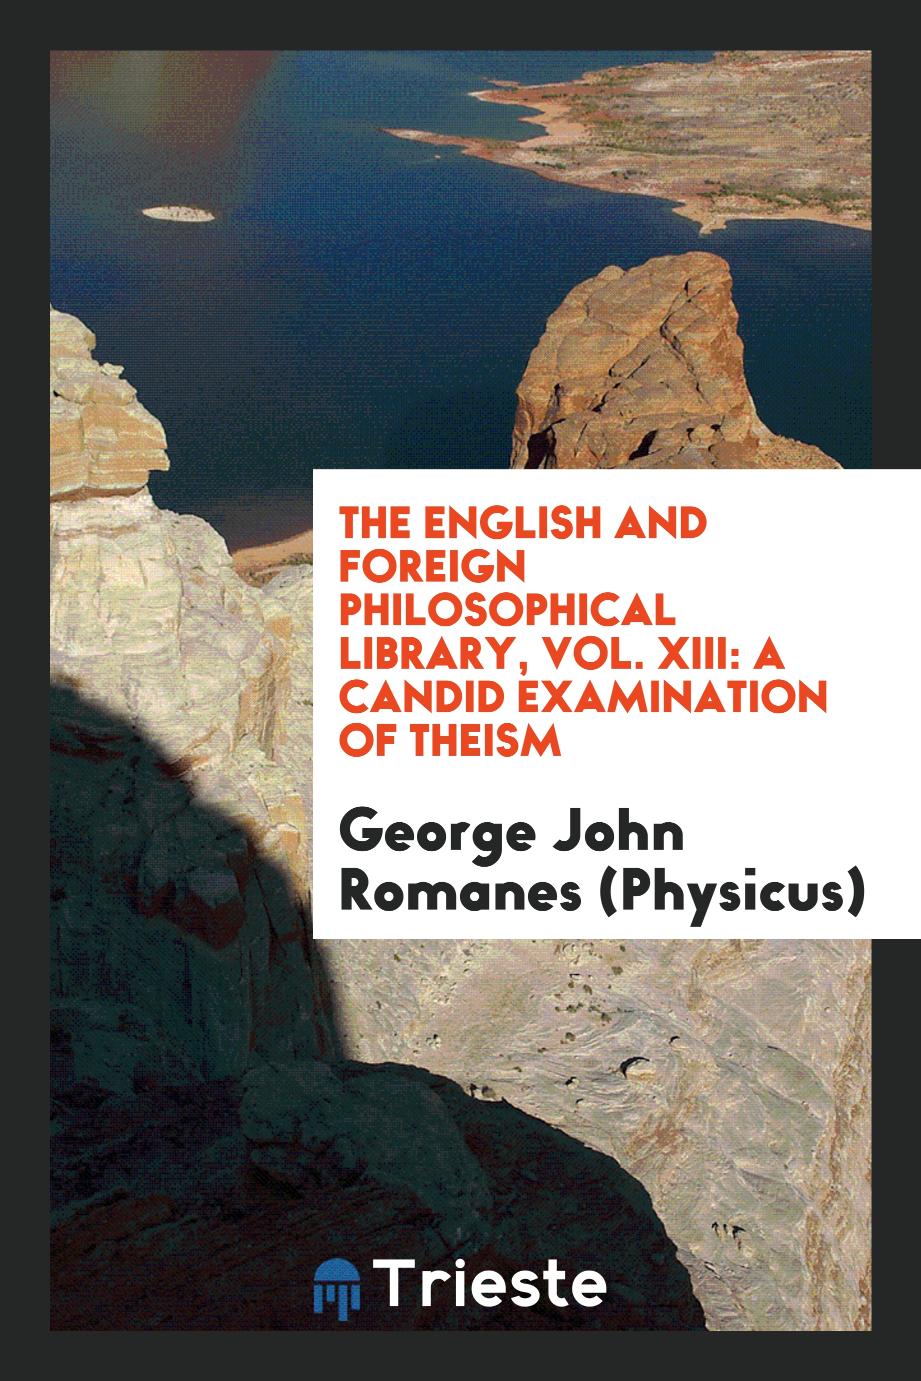 The English and Foreign Philosophical Library, Vol. XIII: A Candid Examination of Theism